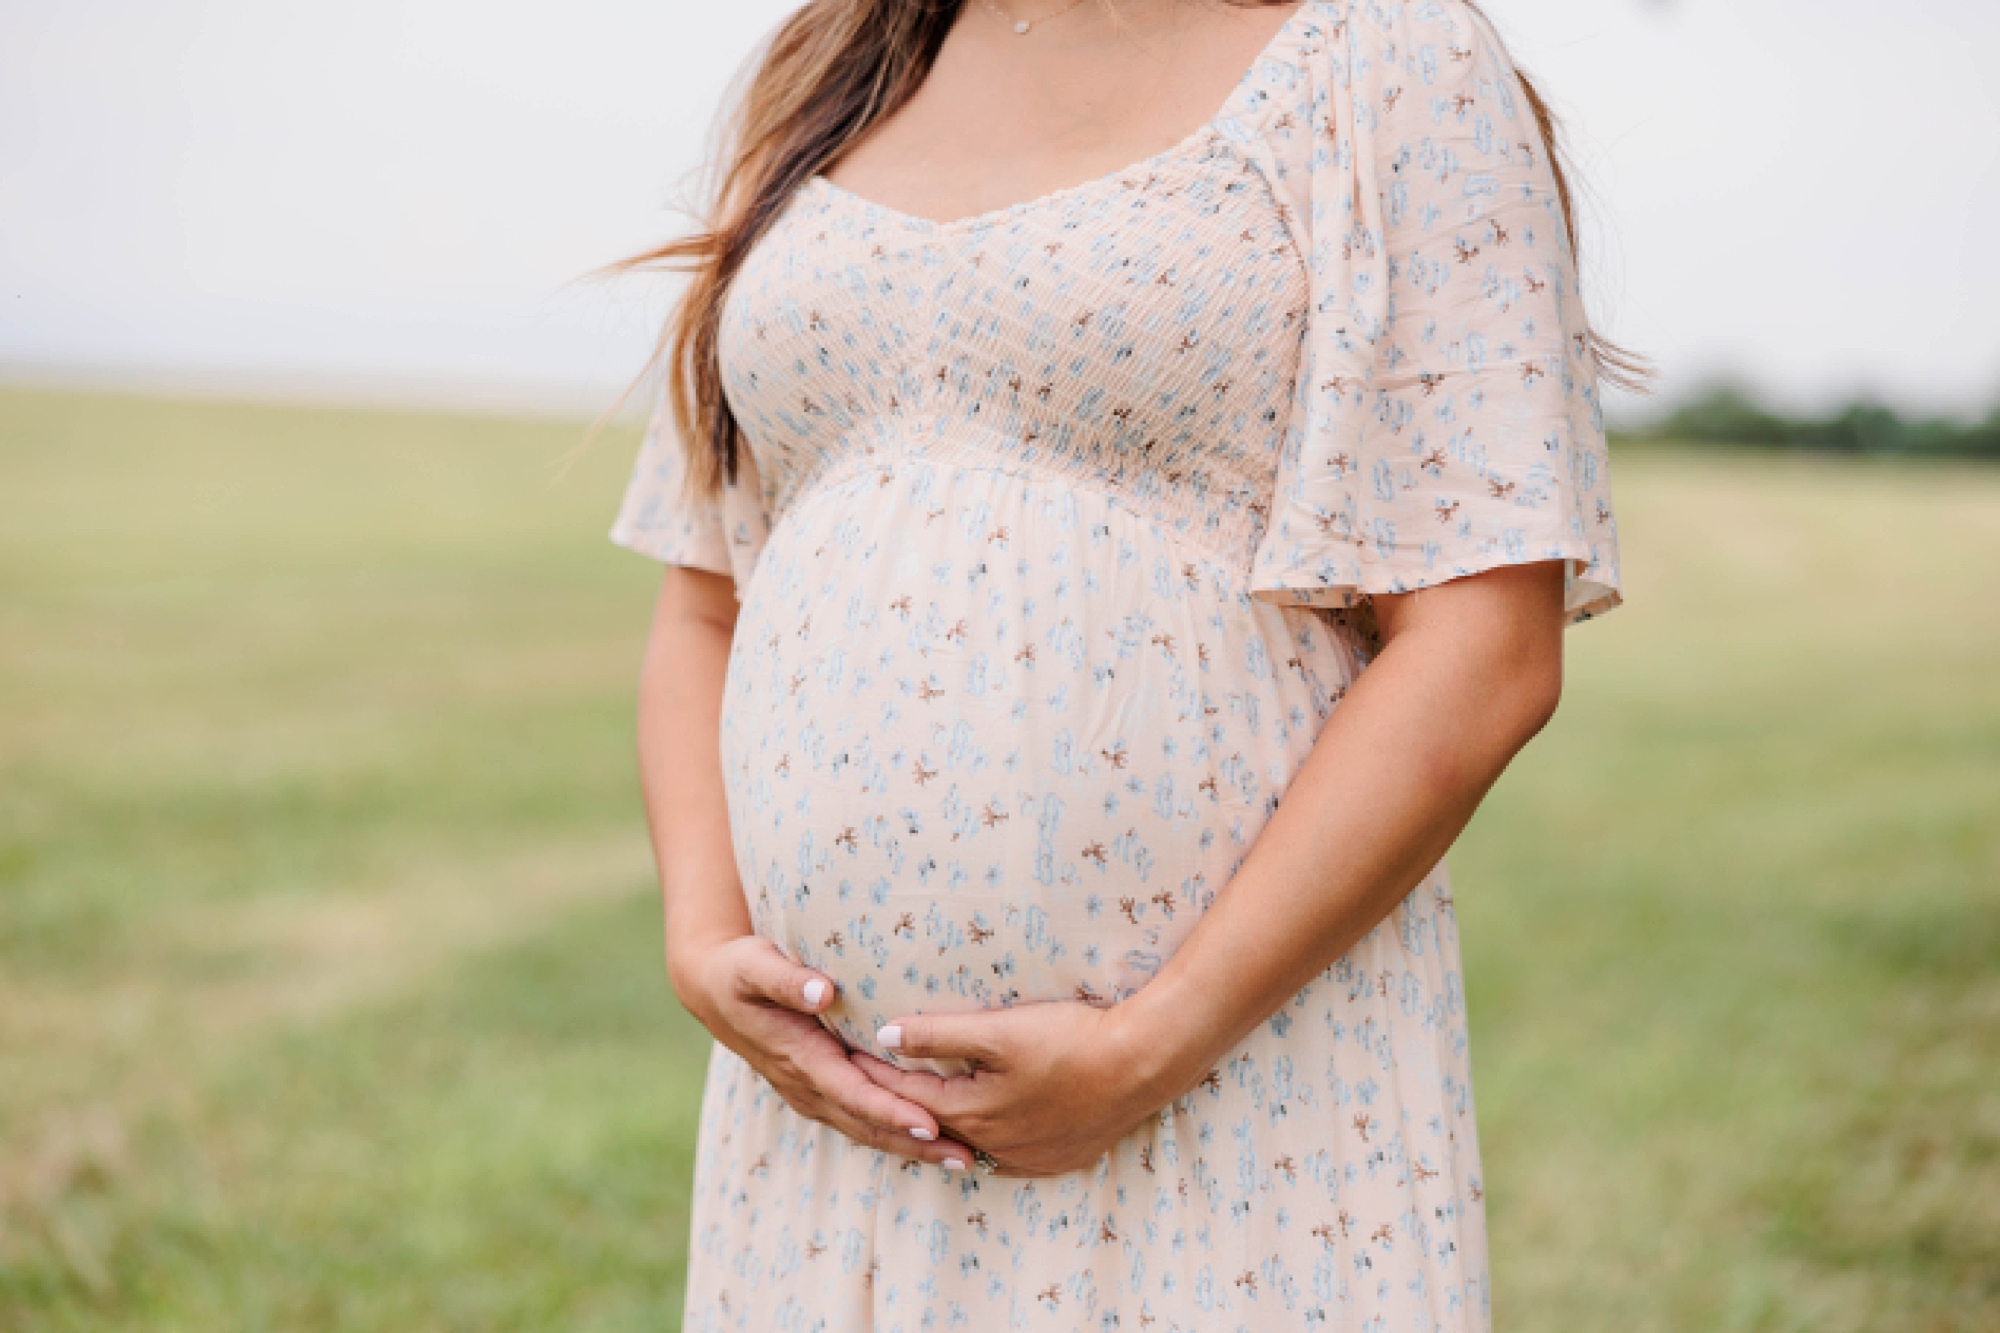 How to Prepare for Your Maternity Session with DMV Maternity Photographer Christina Tundo Photography: 7 tips for stress-free portraits